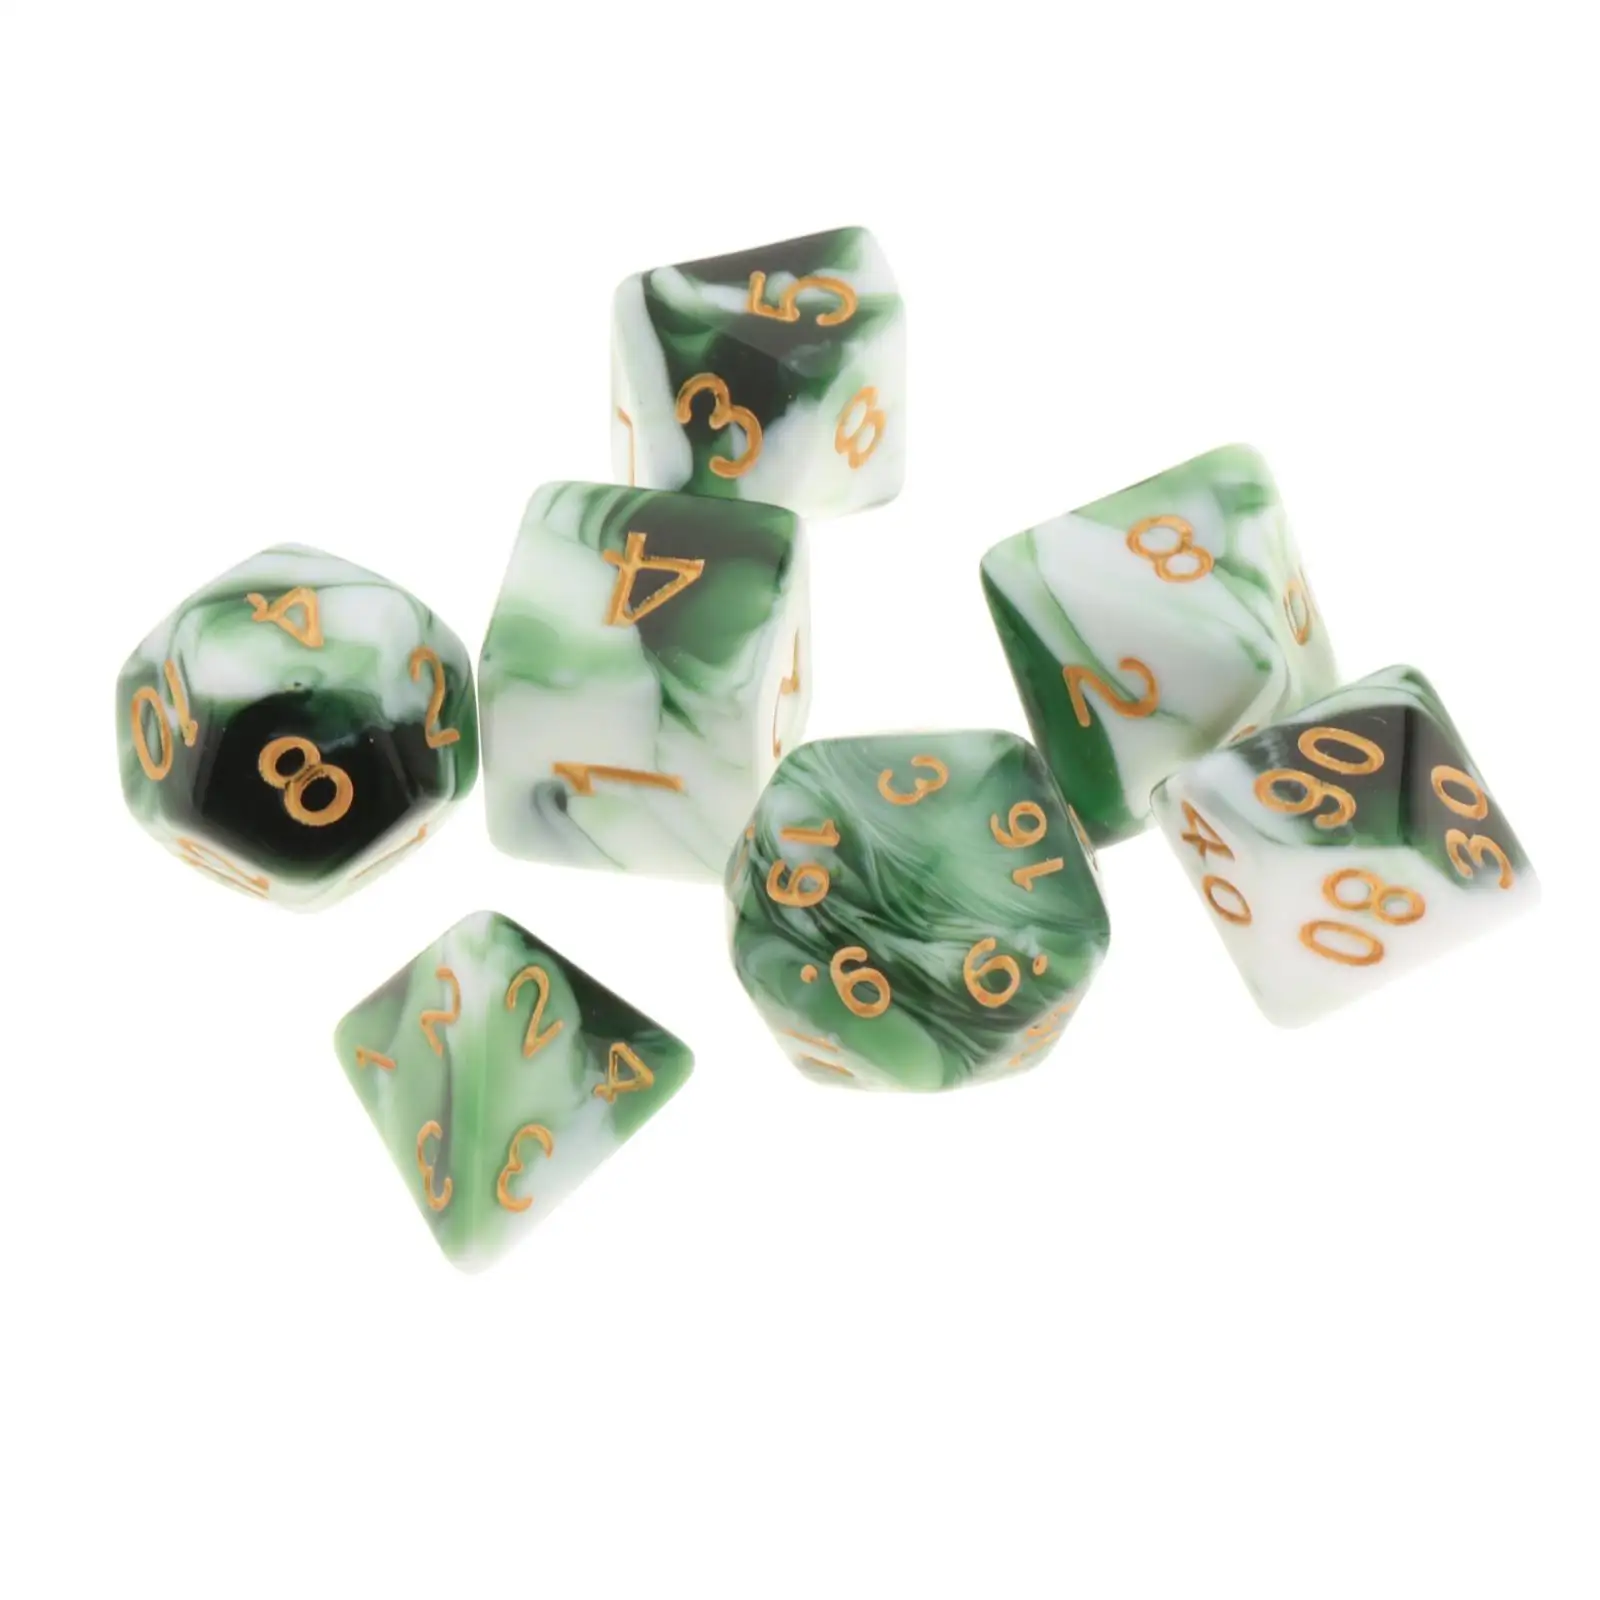 7x Polyhedral Dice Board Games Table Games Party Favors for Dnd Rpg Mtg